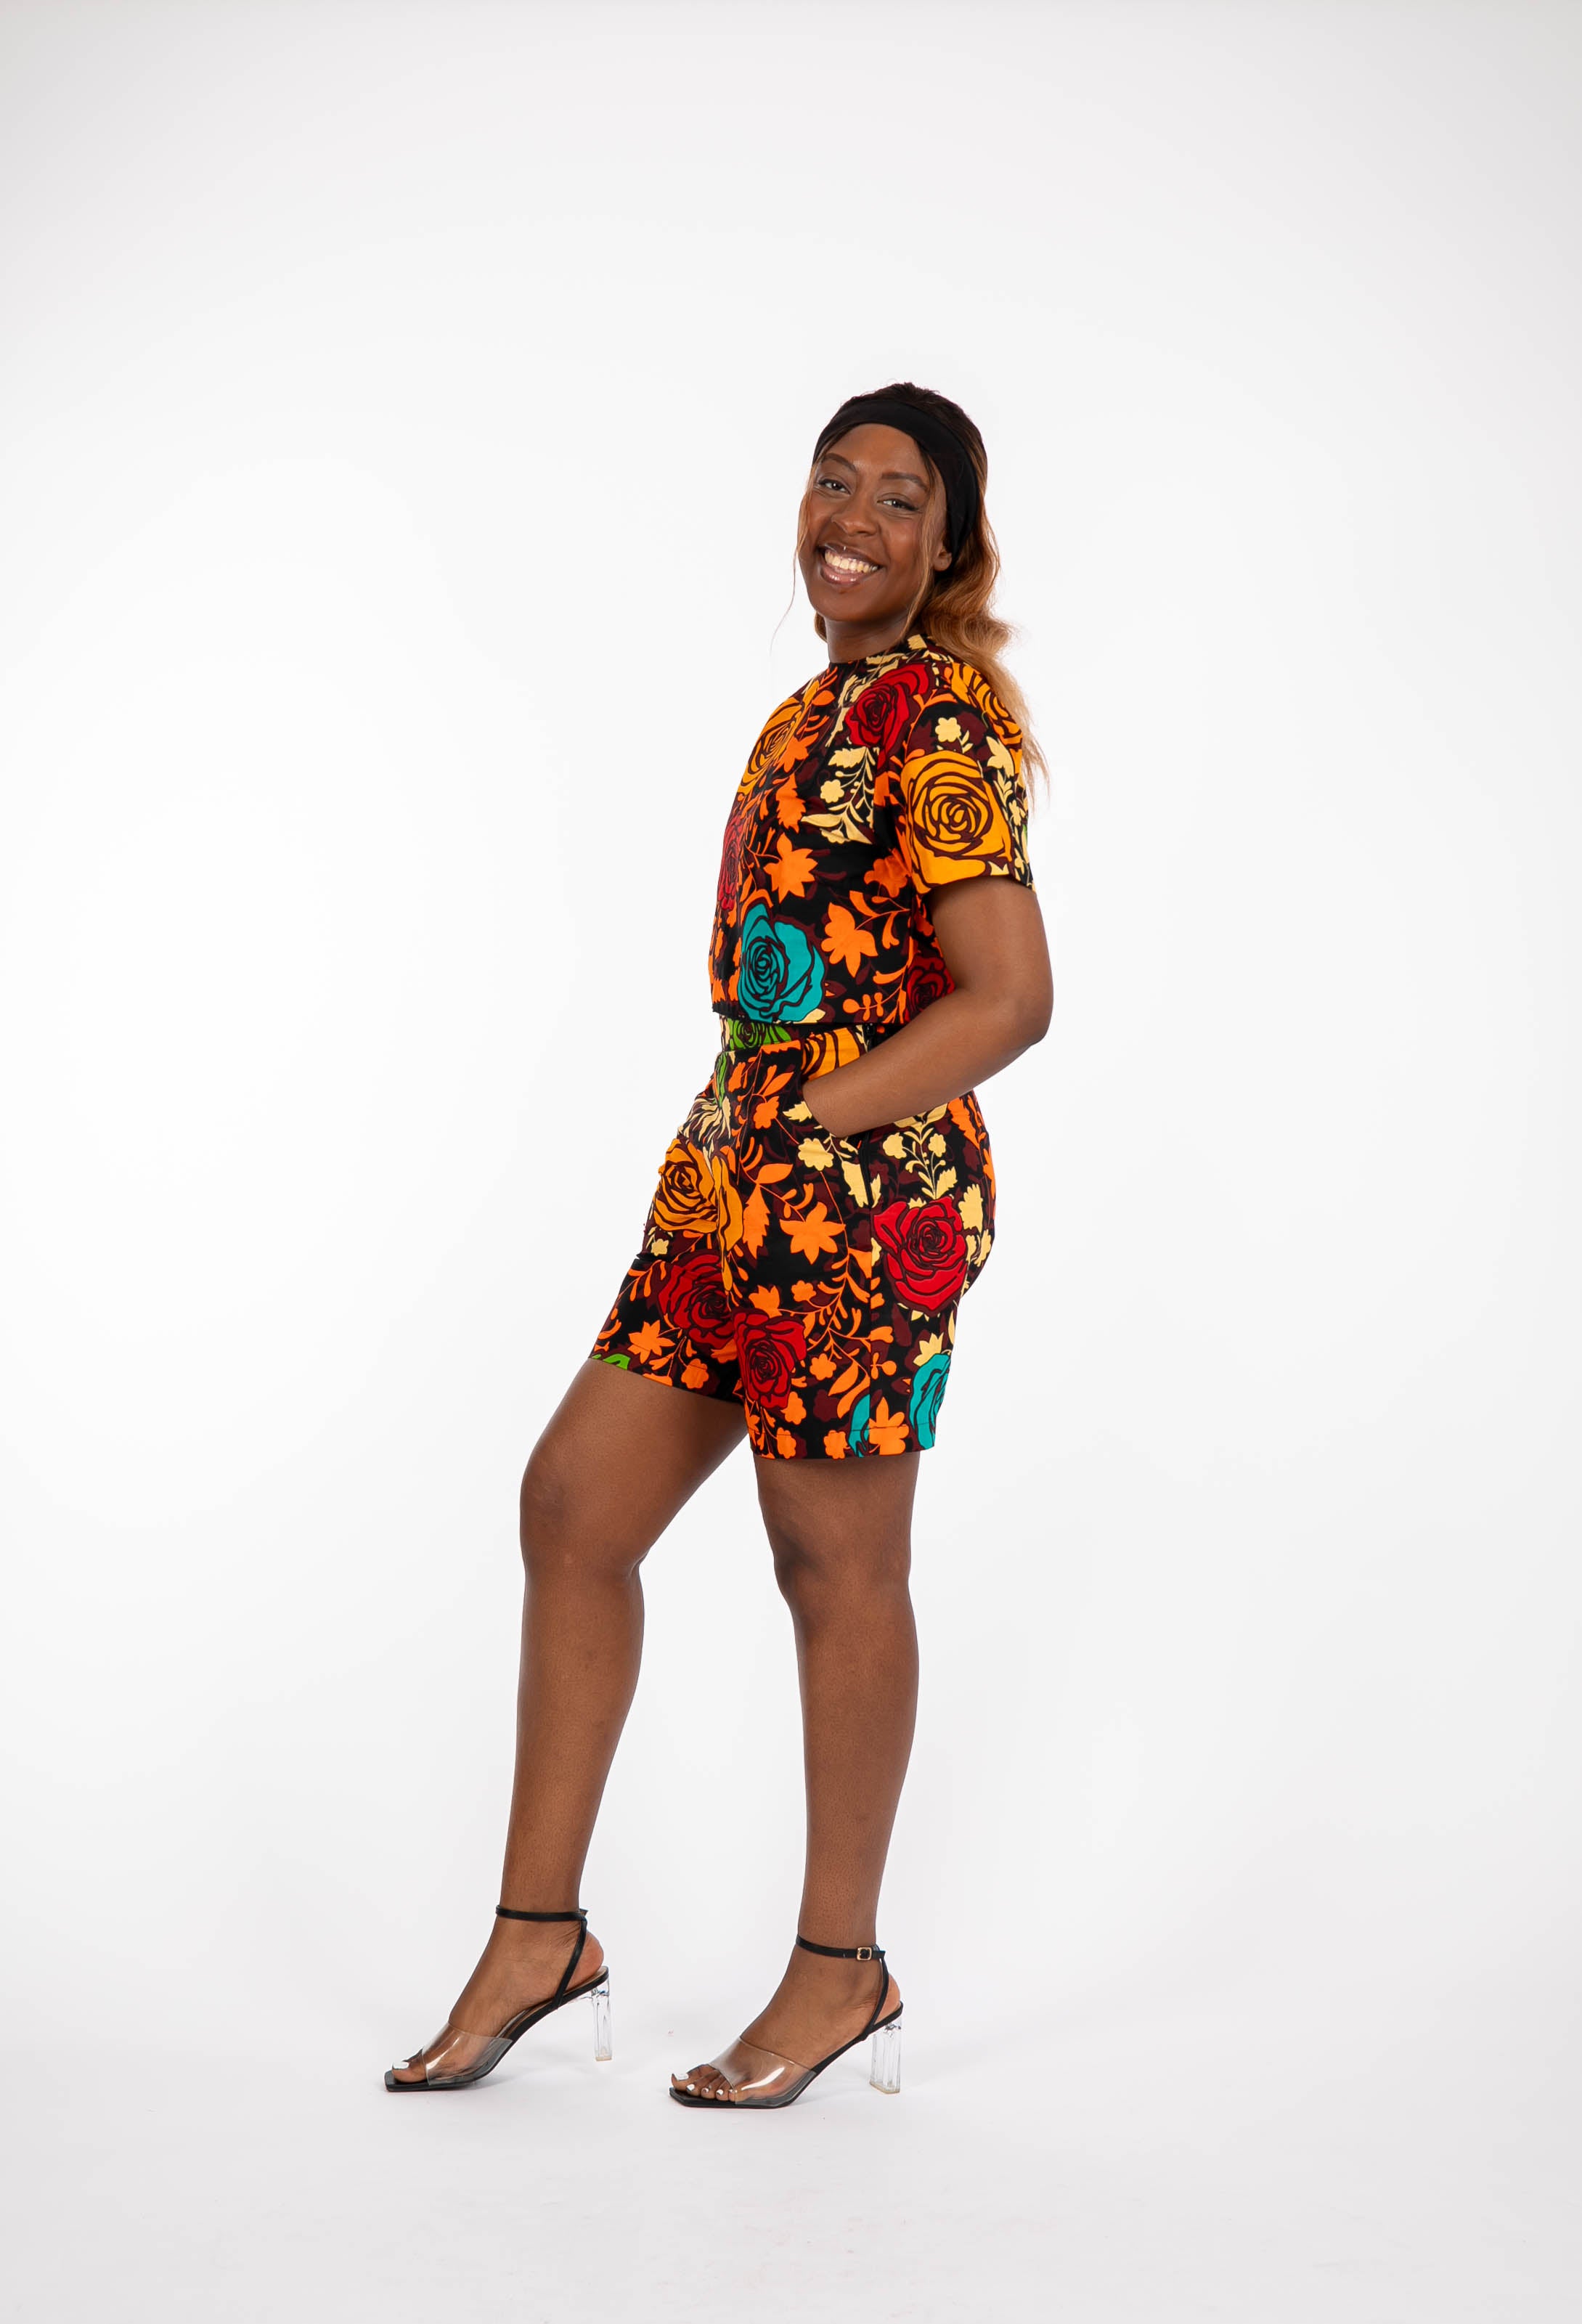 Temad collections Bombon  african print ankara shorts and top, Stylish African print bottoms and tops, African print Ankara fabric, African shorts, African crop top , African crop top , African print casual palazzo , African crop top for ladies, African flared trousers, Ankara crop top, Ankara top, Ankara crop top, latest Ankara shorts, african floral shorts and tops, stylish african shorts,  african crop top matching shorts